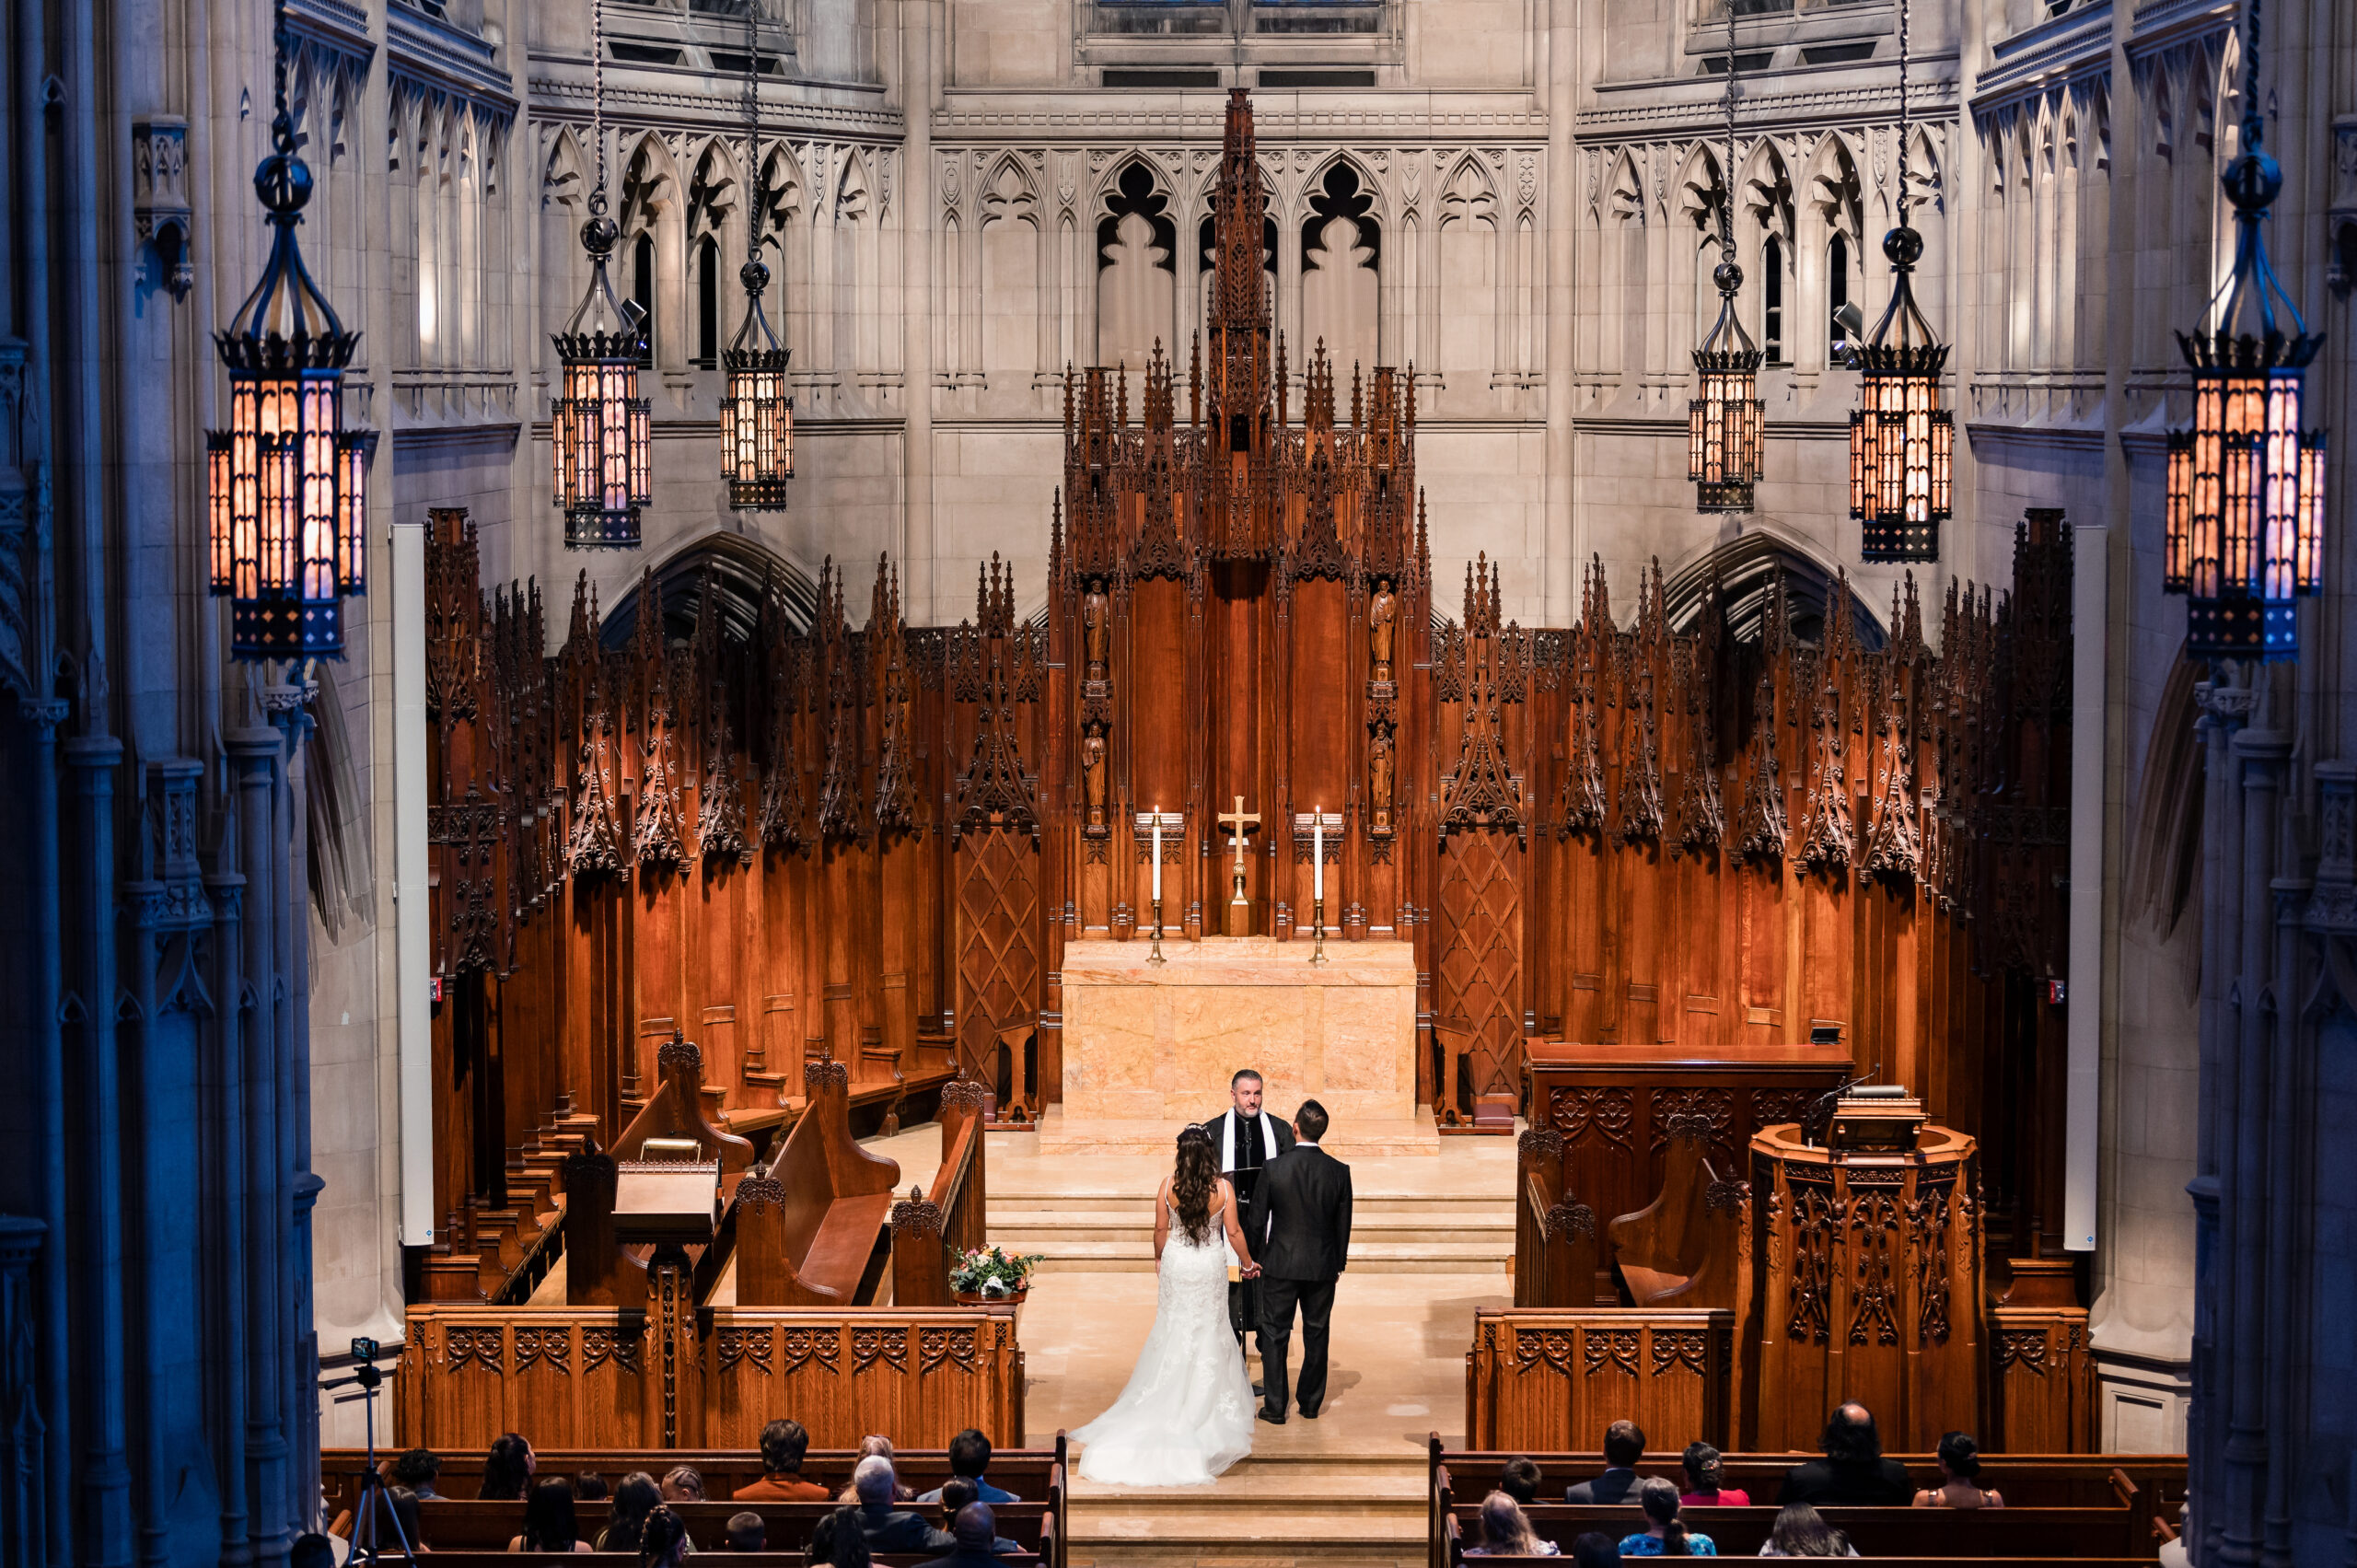 A wide view of a couple getting married at the Heinz Memorial Chapel in front of stunning architecture.